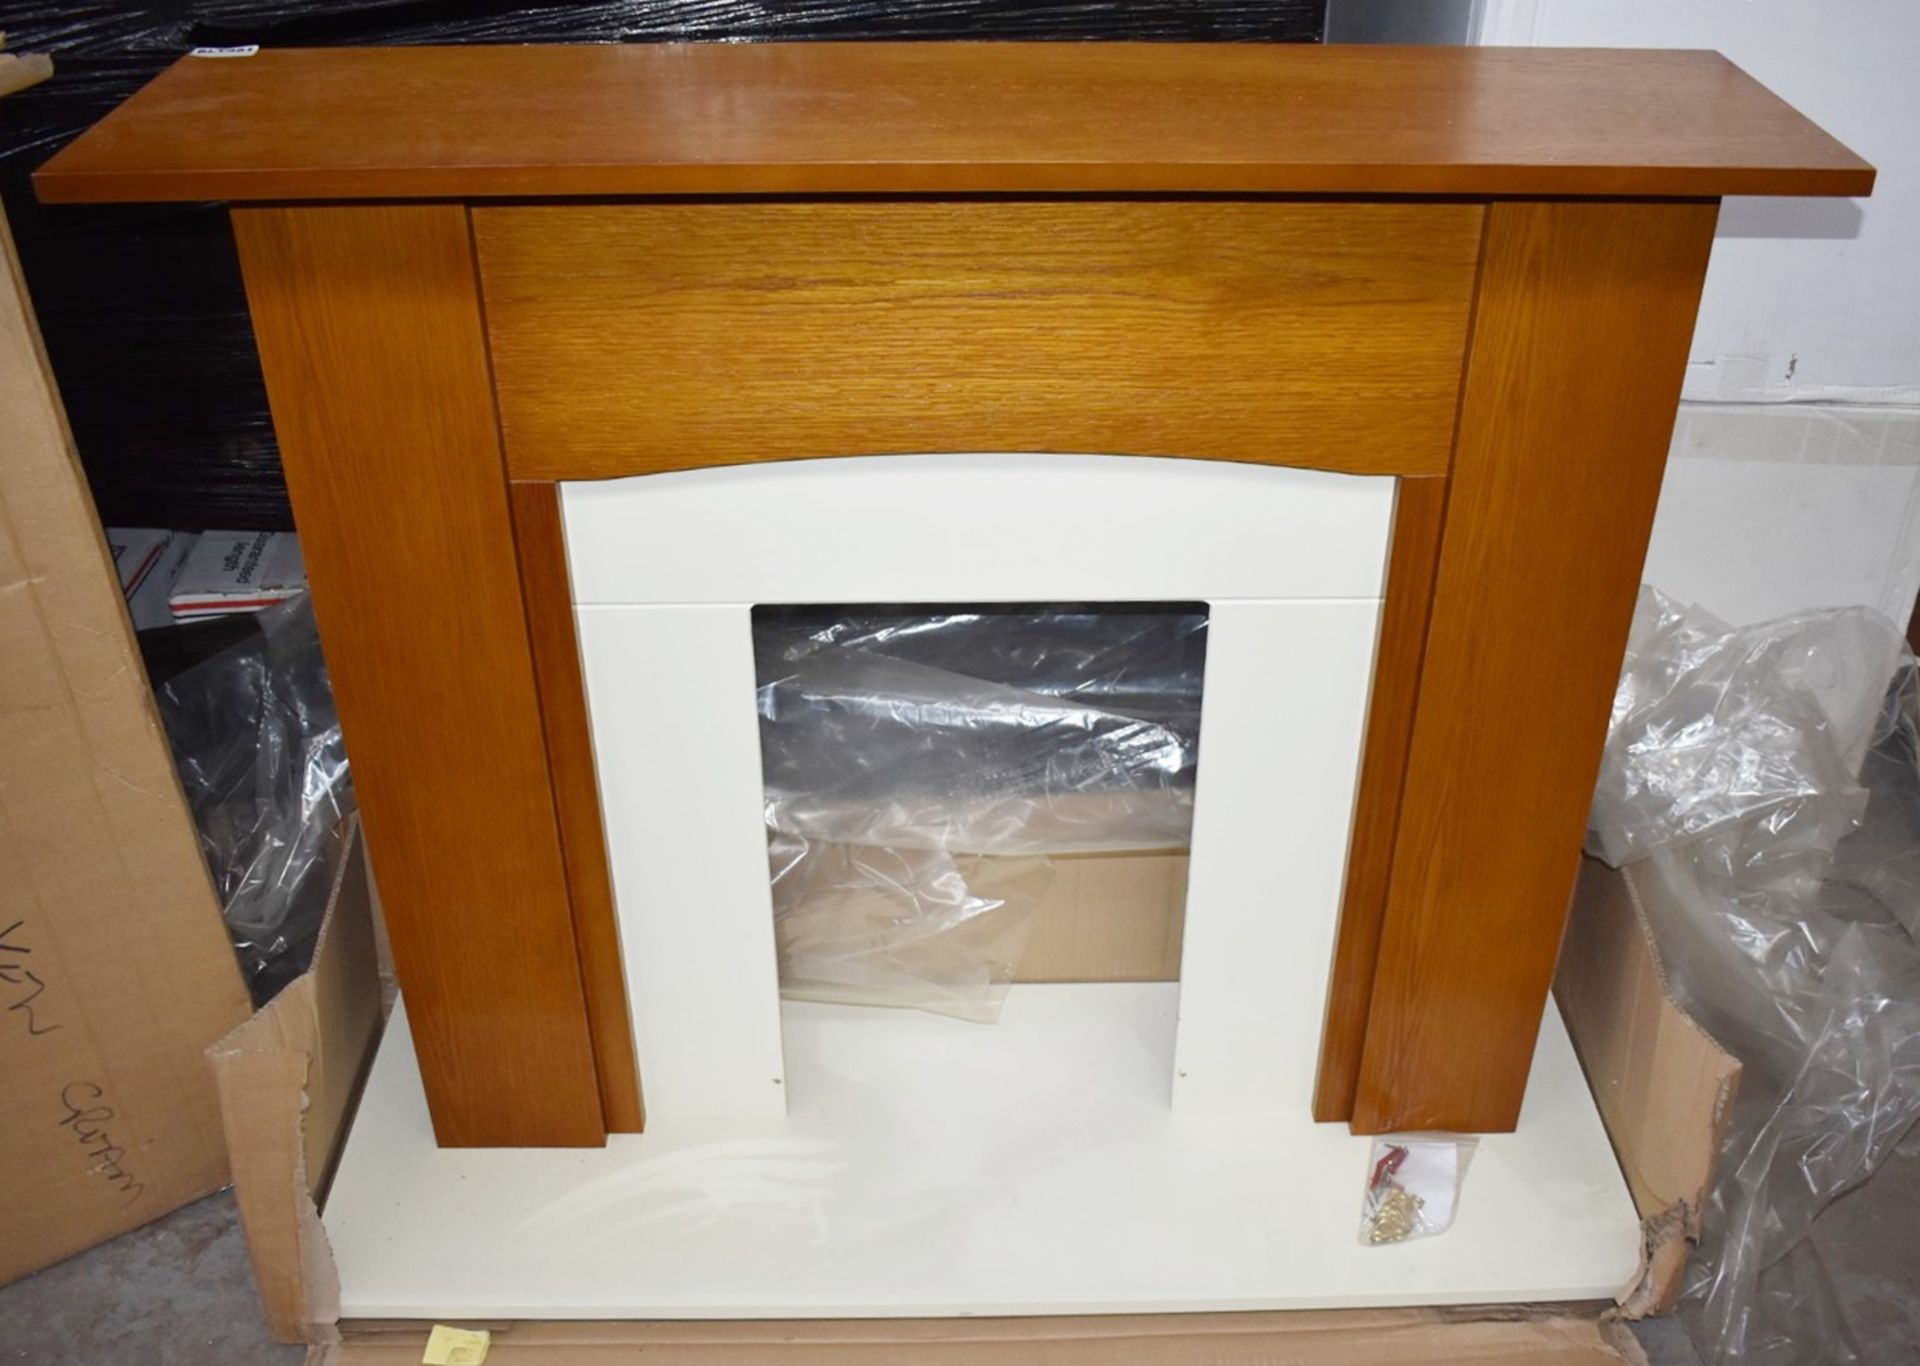 1 x Wooden Fire Surround With Cherry Finish, Stone Hearth and Matching Back Trim - New and Unused